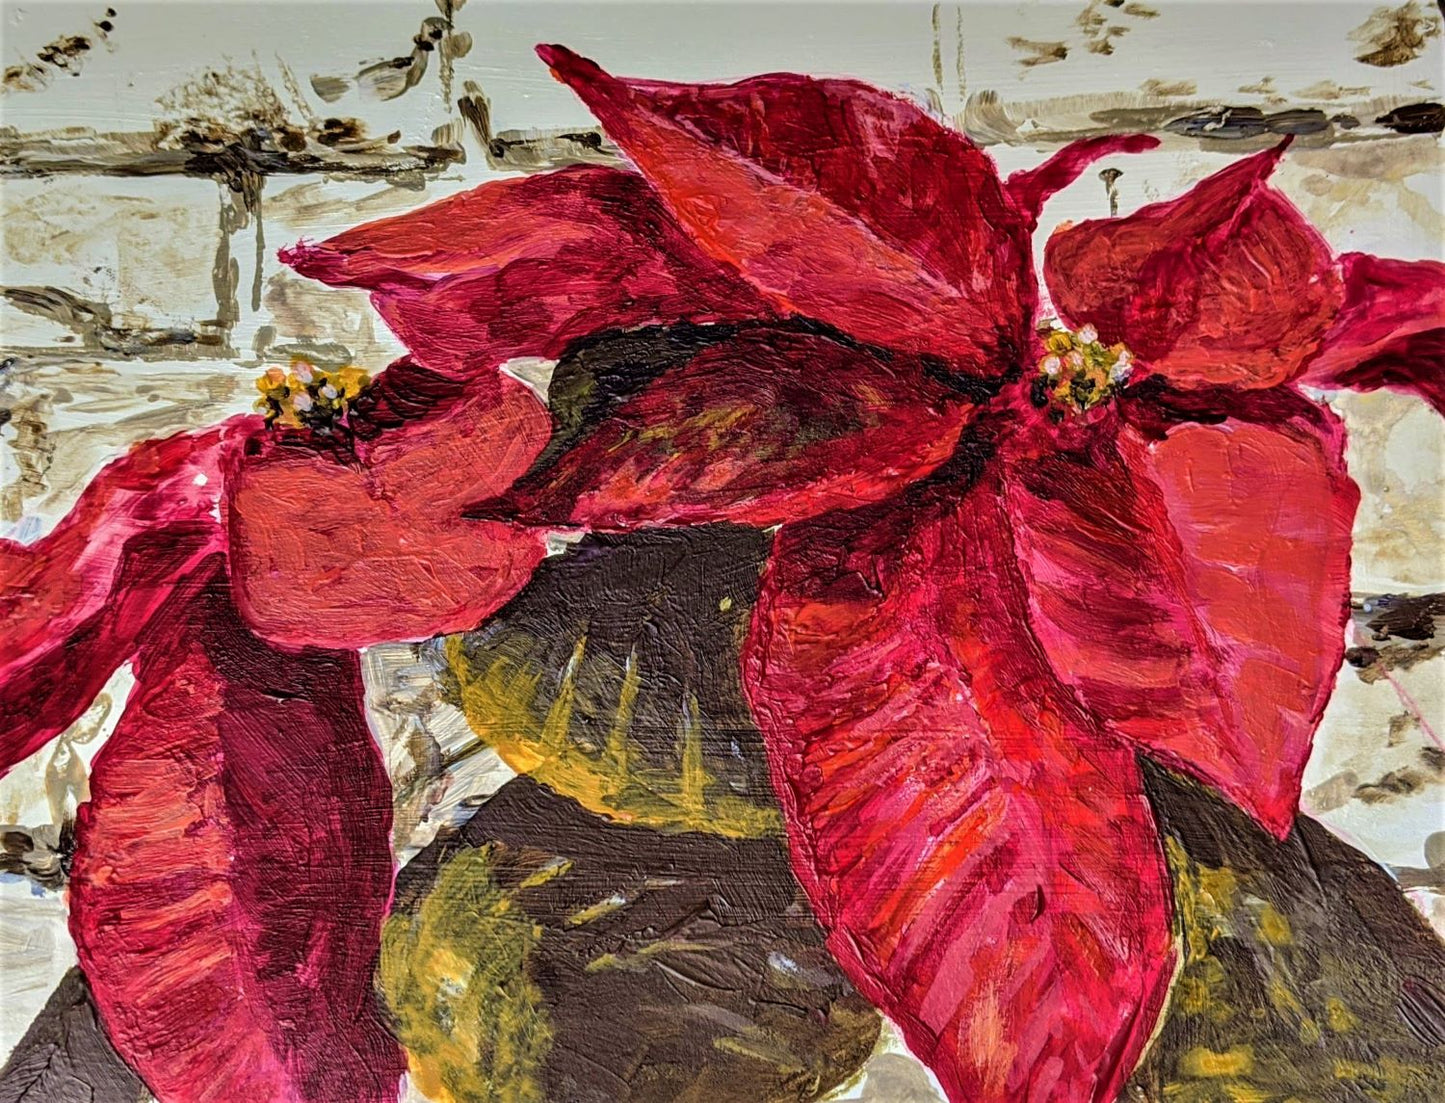 Poinsettia on the Mantel acrylic painting on paper